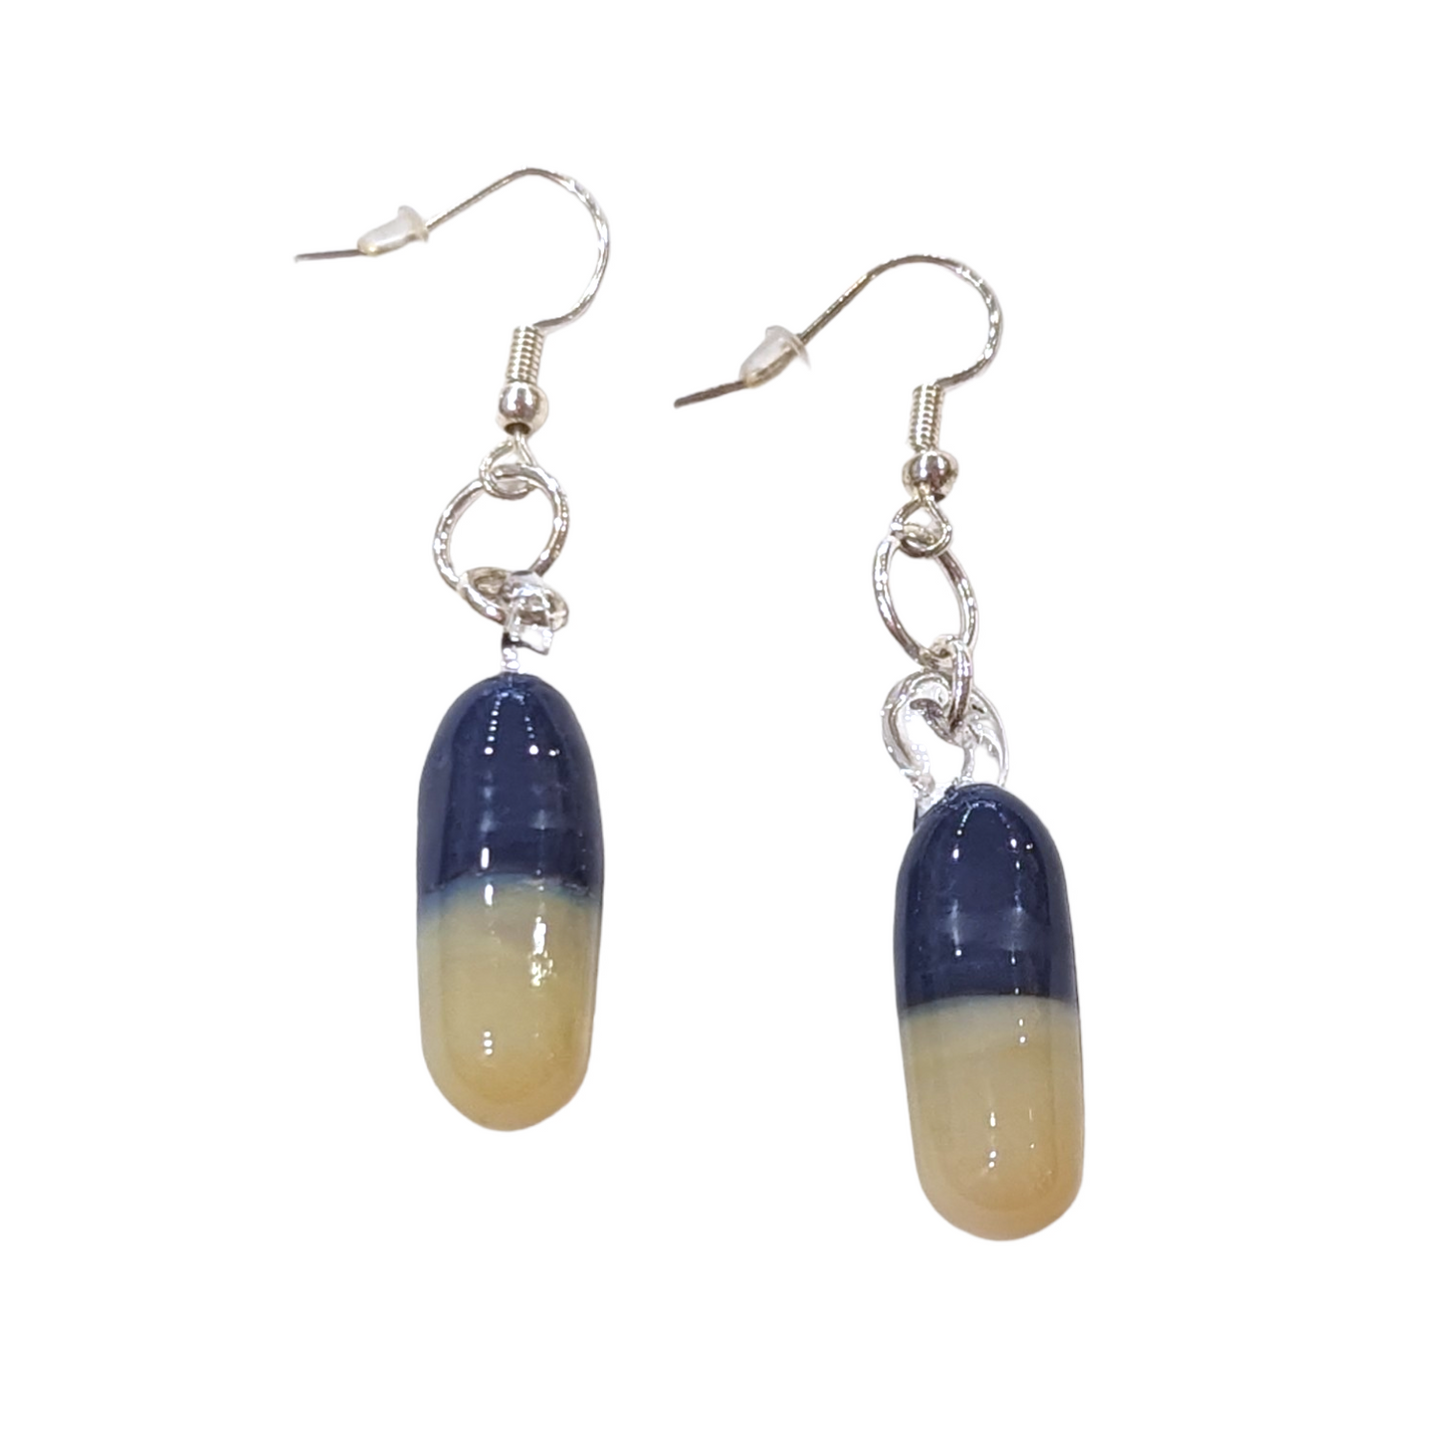 Handmade Glass Happy Pills Earrings by manic pixie dream squirrel